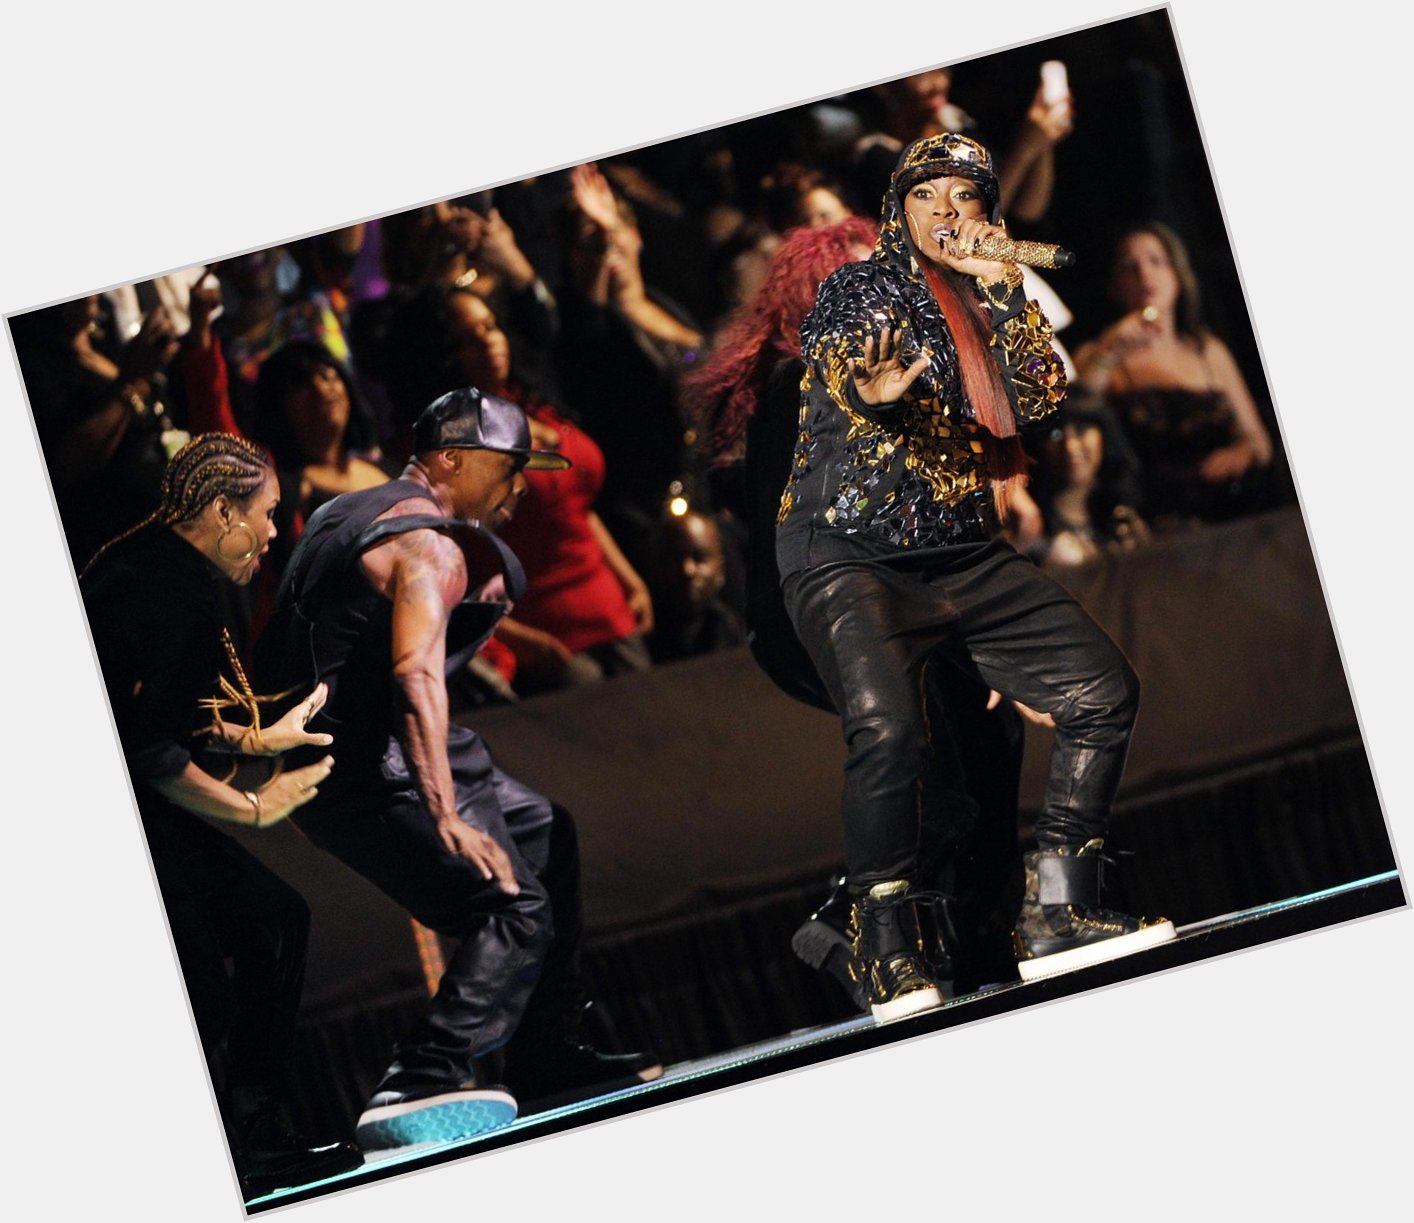 Happy 44th birthday, Missy Elliott! Here are 44 reasons we need you back ASAP  